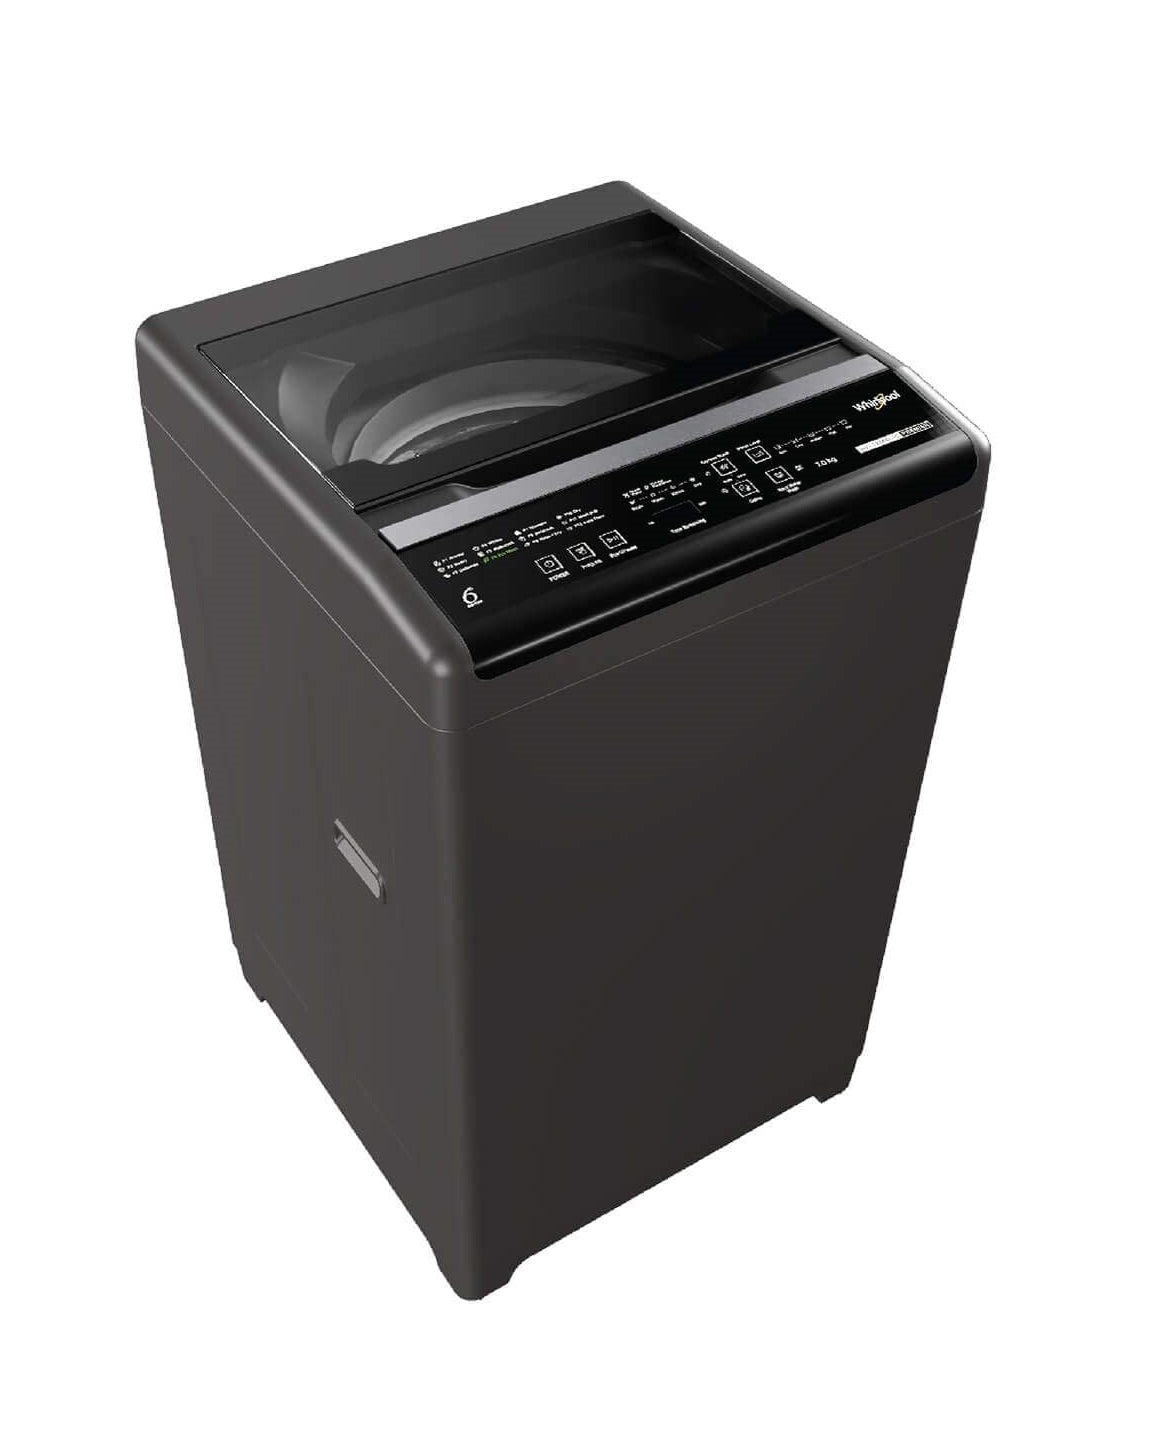 Whirlpool Classic Genx 7.0 10YMW 7 kg Fully Automatic Top Load Grey (31598)